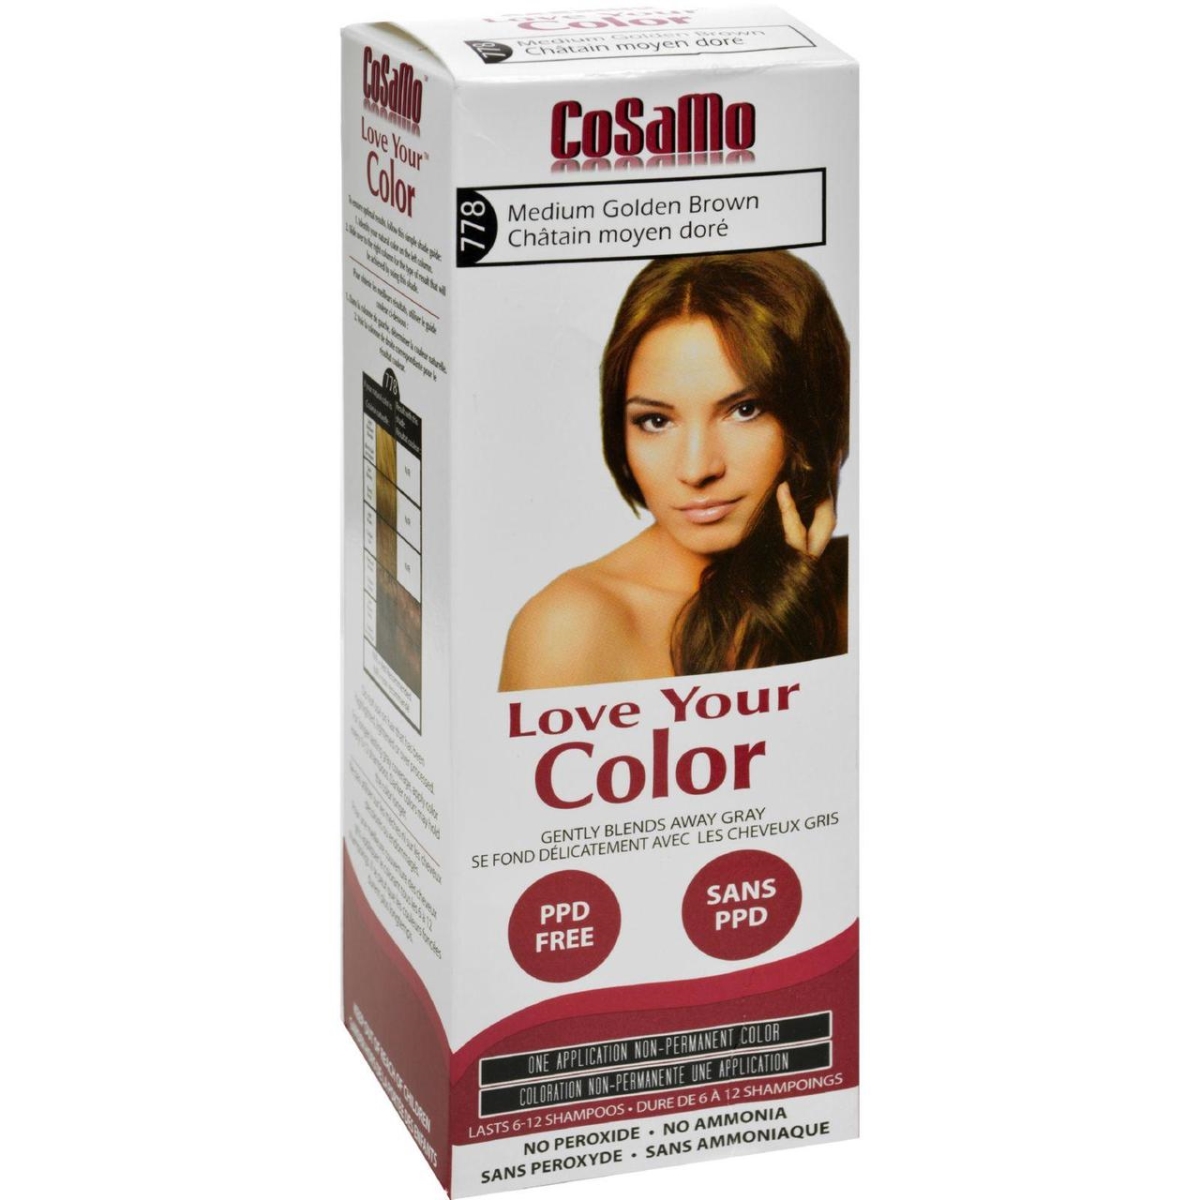 Hair Color Cosamo Non Permanent, Med Gold Brown - 1 Count